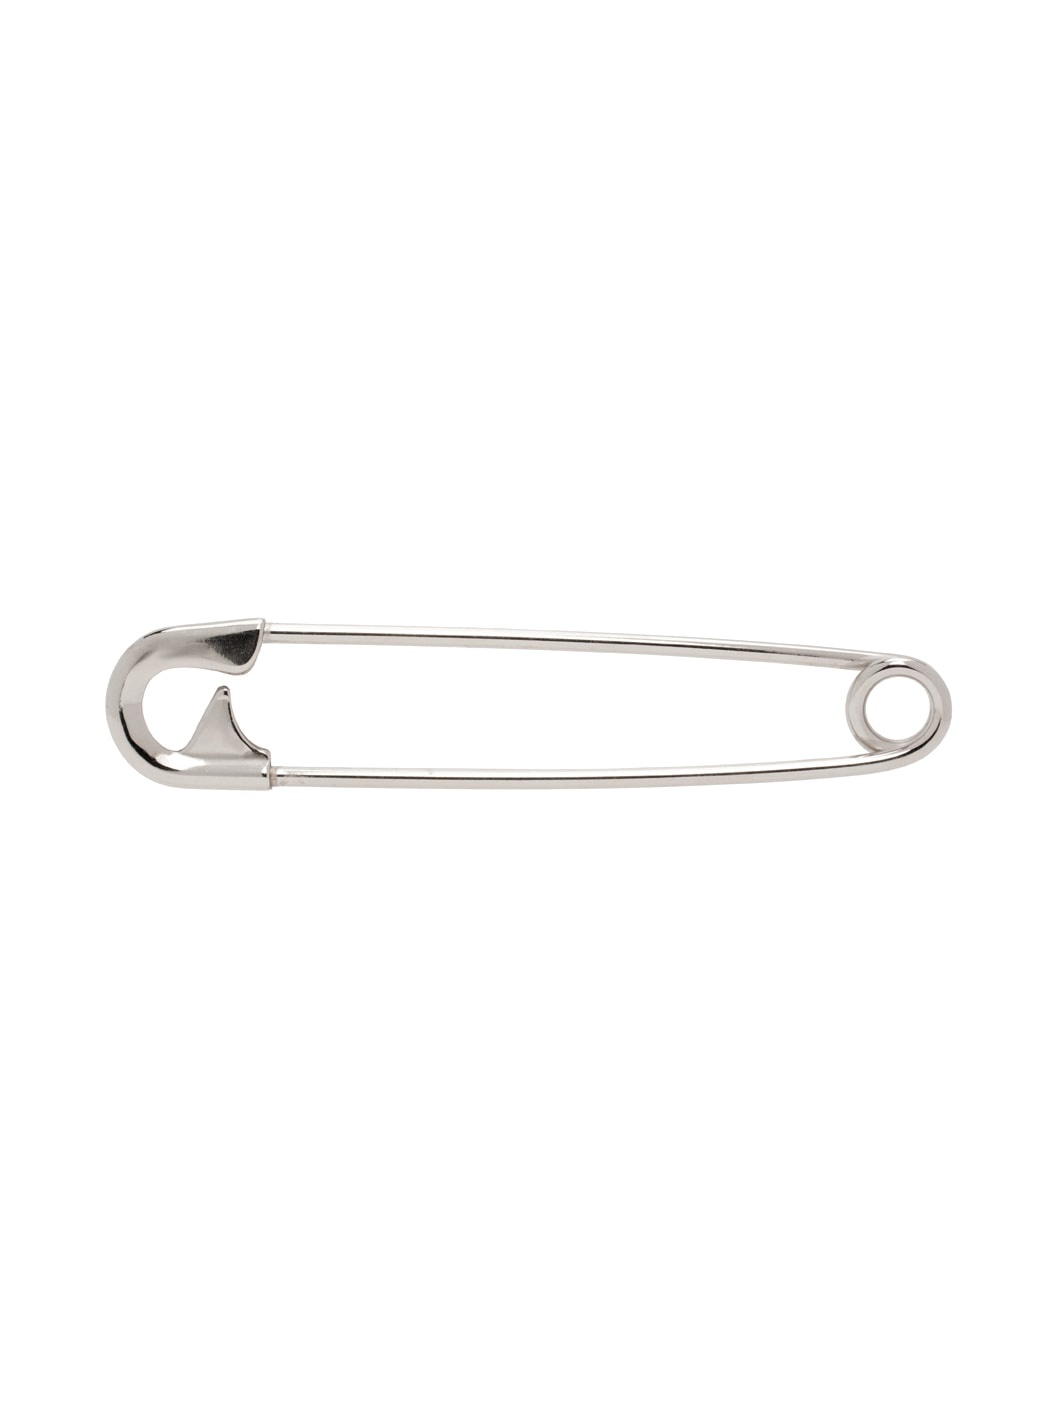 Silver Safety Pin - 2